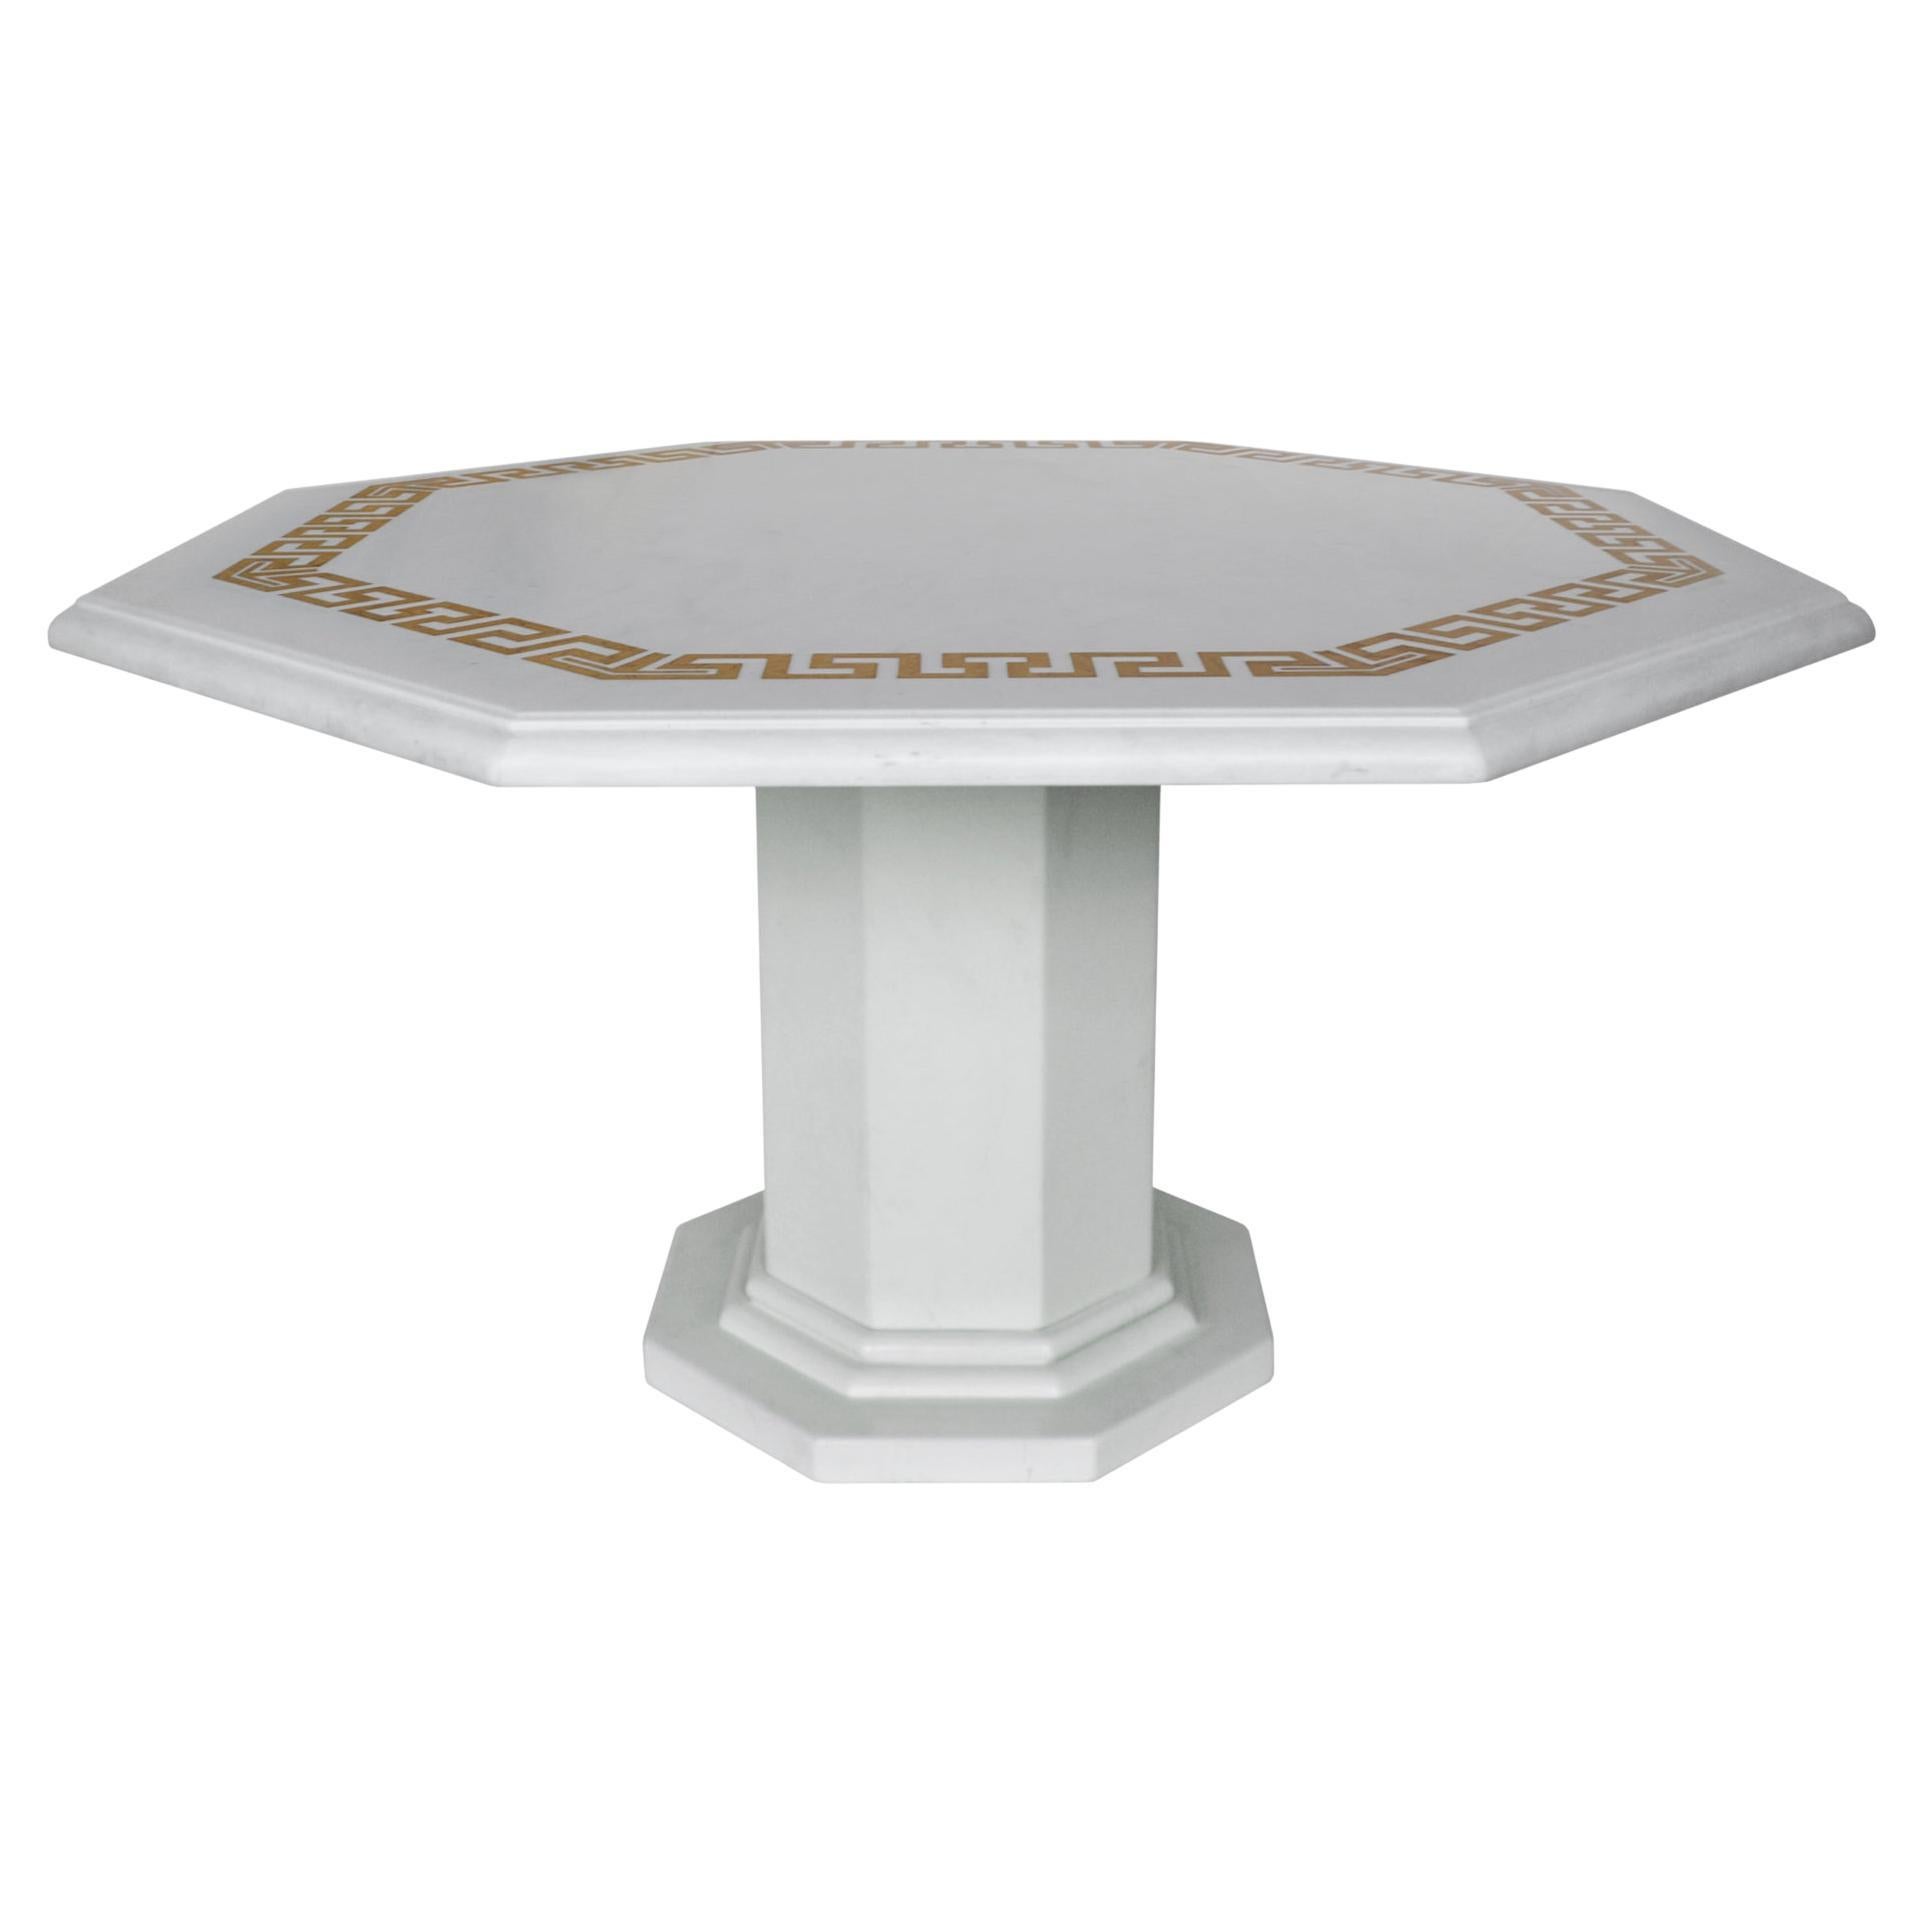 White Marble Table Octagonal top and Lacquered Wooden Central Base .
Imposing and enriched with refined accents, this extraordinary dining table creates a luxurious ambiance in a modern and classic dining room.
This octagonal table has been